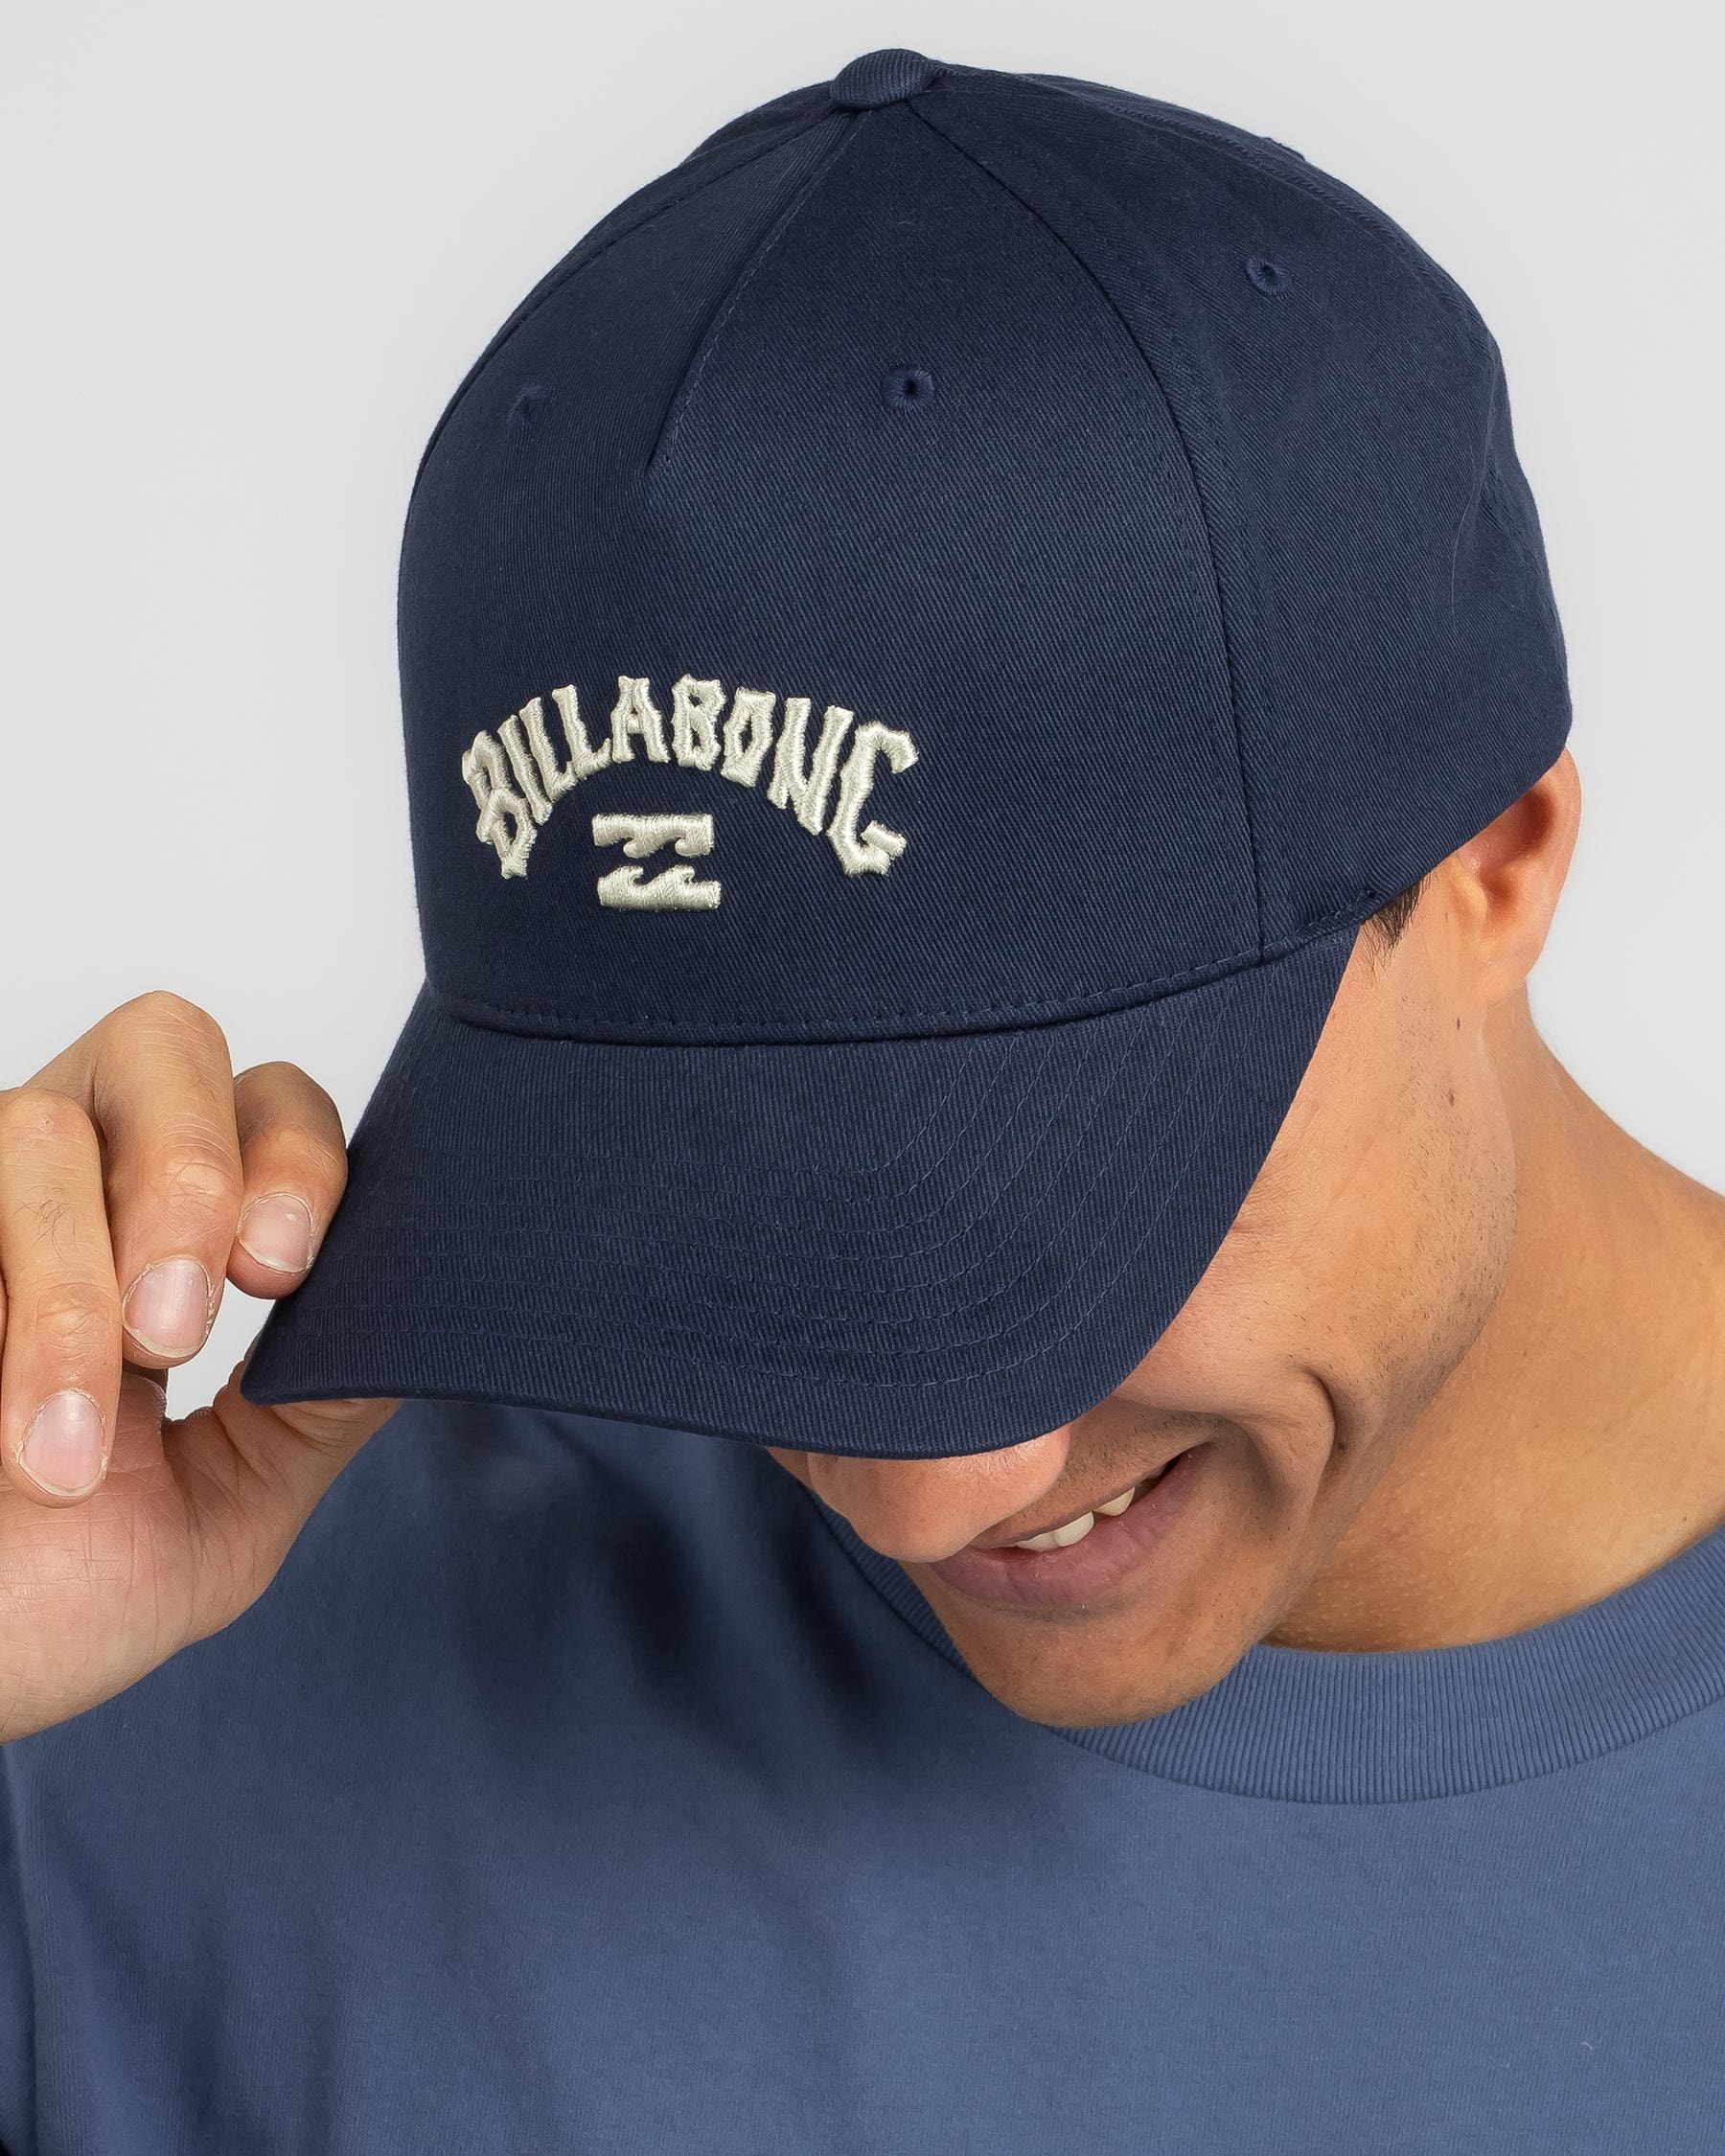 Snapback States Arch Easy & - Flexfit Beach Navy 110 United Returns FREE* City In Cap - Shipping Billabong